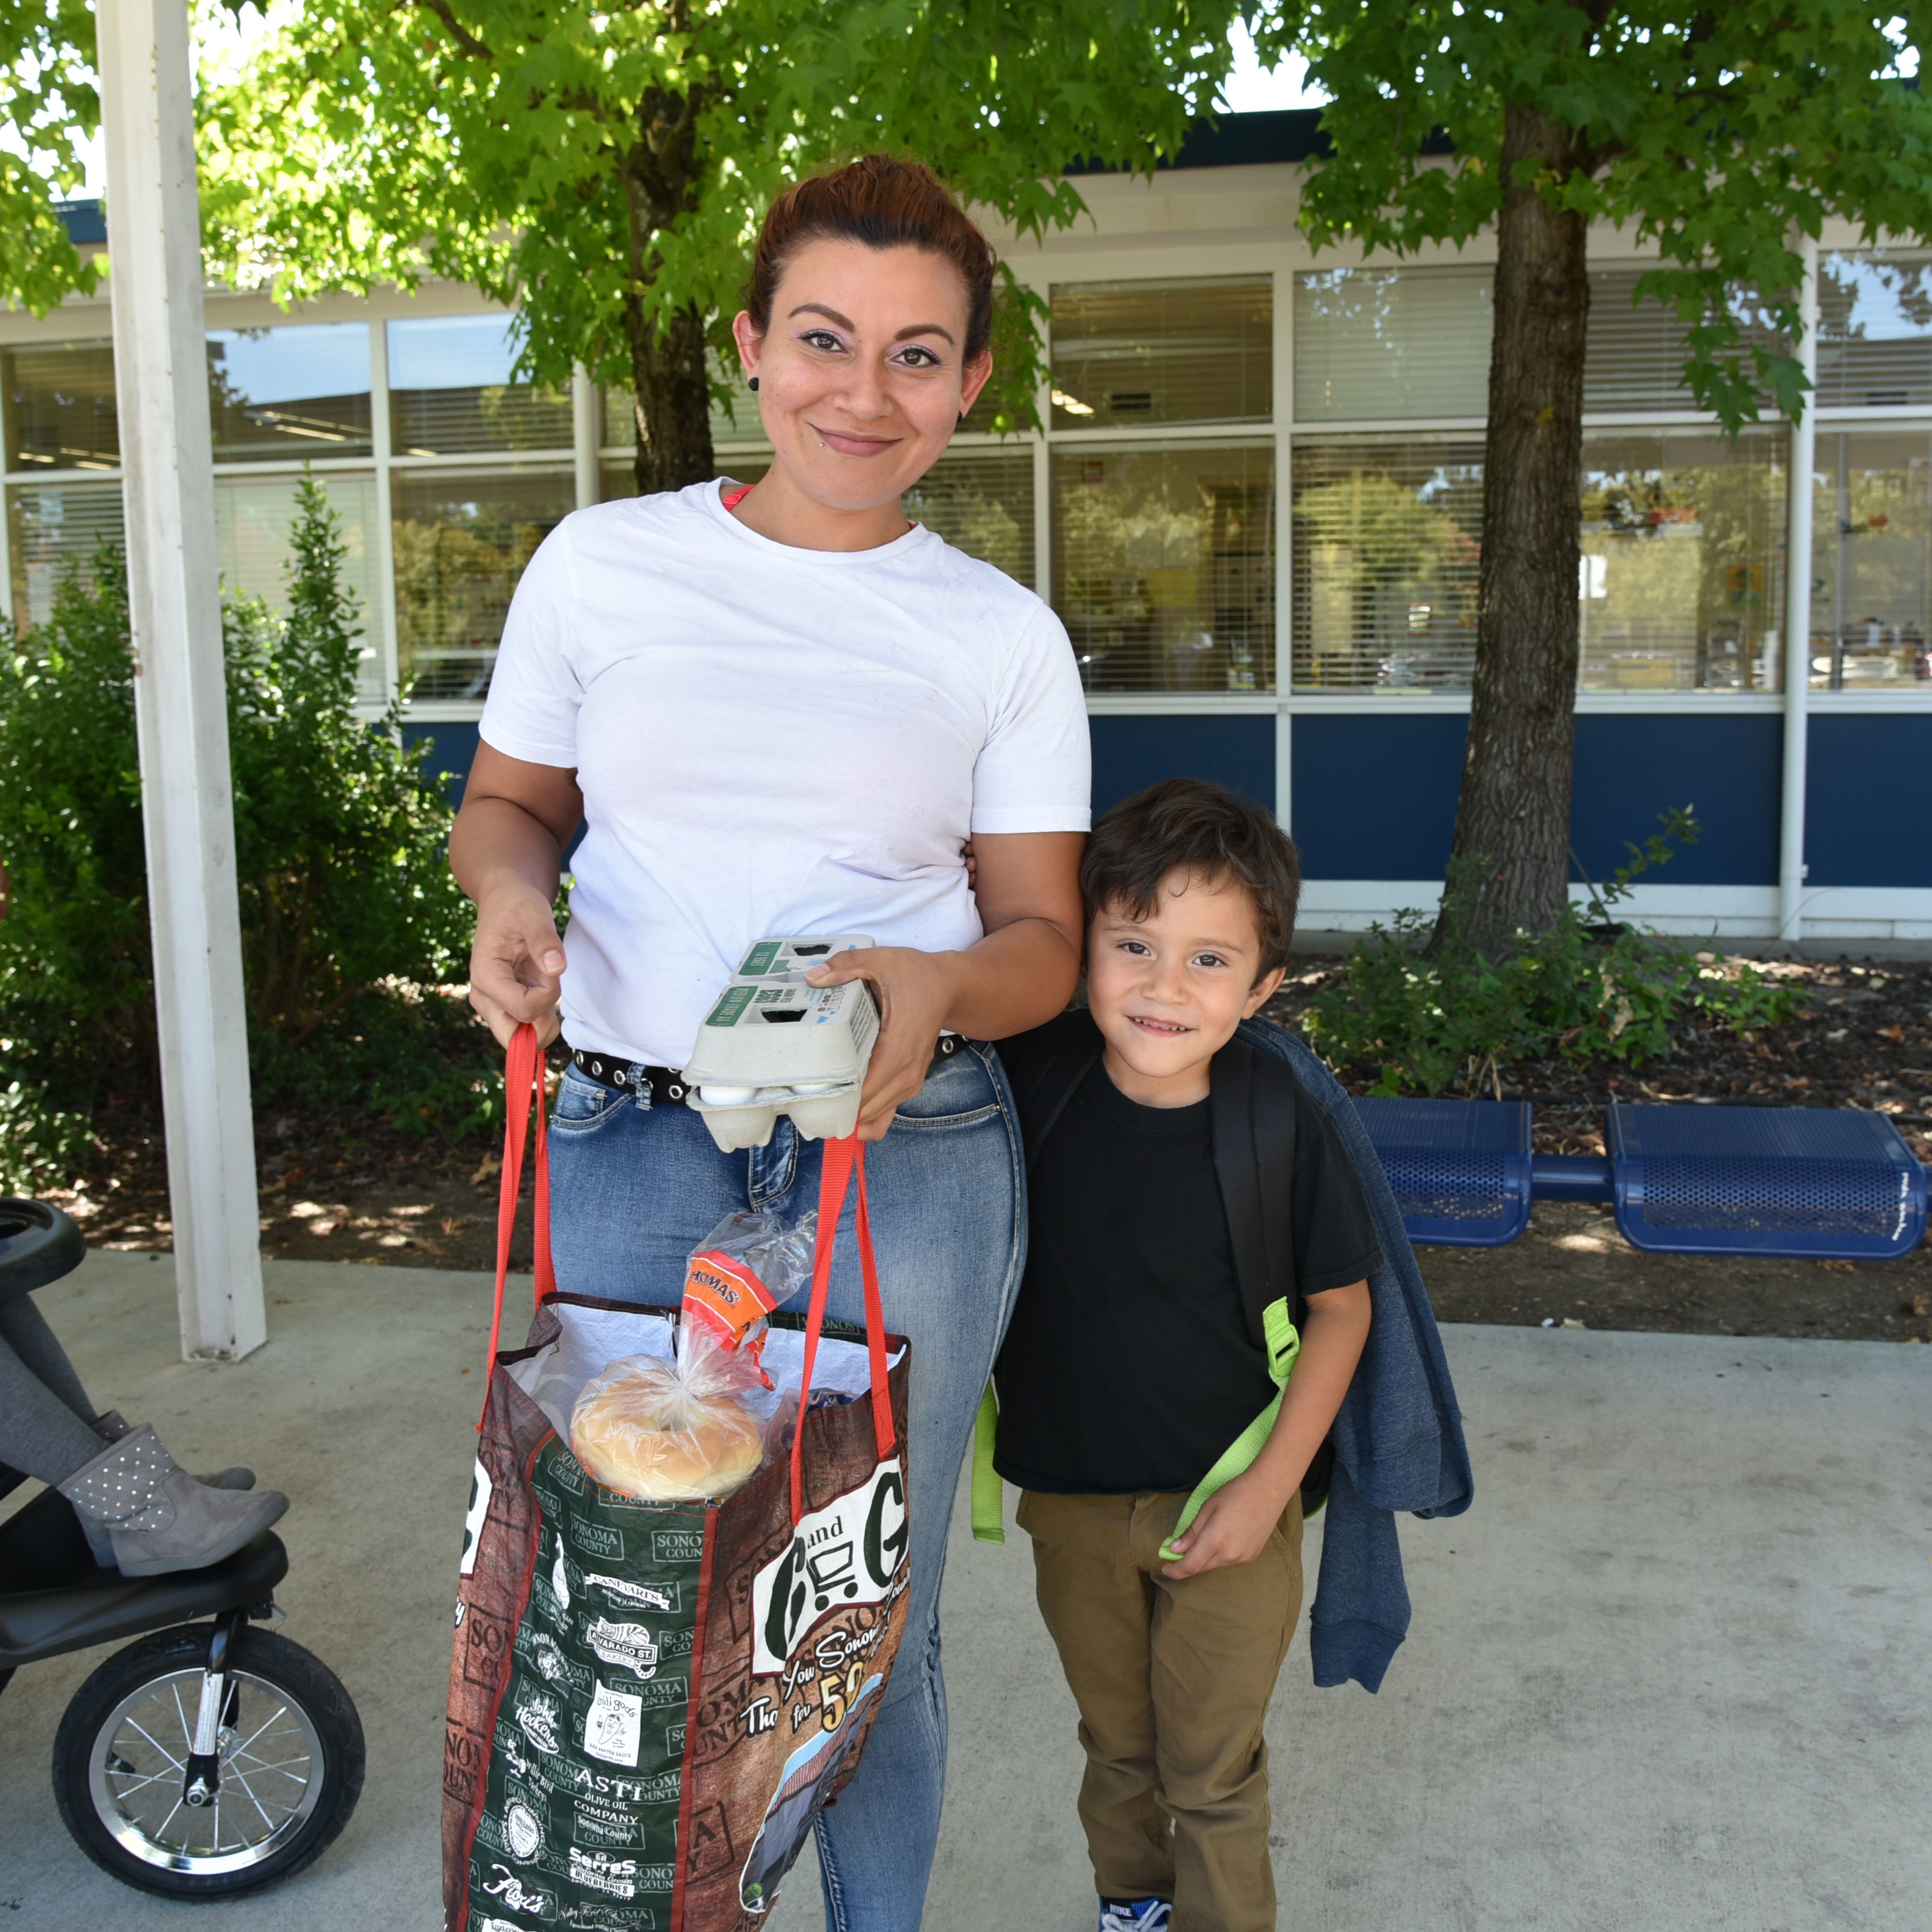 Mother with her son, smiling and holding a bag of groceries in front of a school